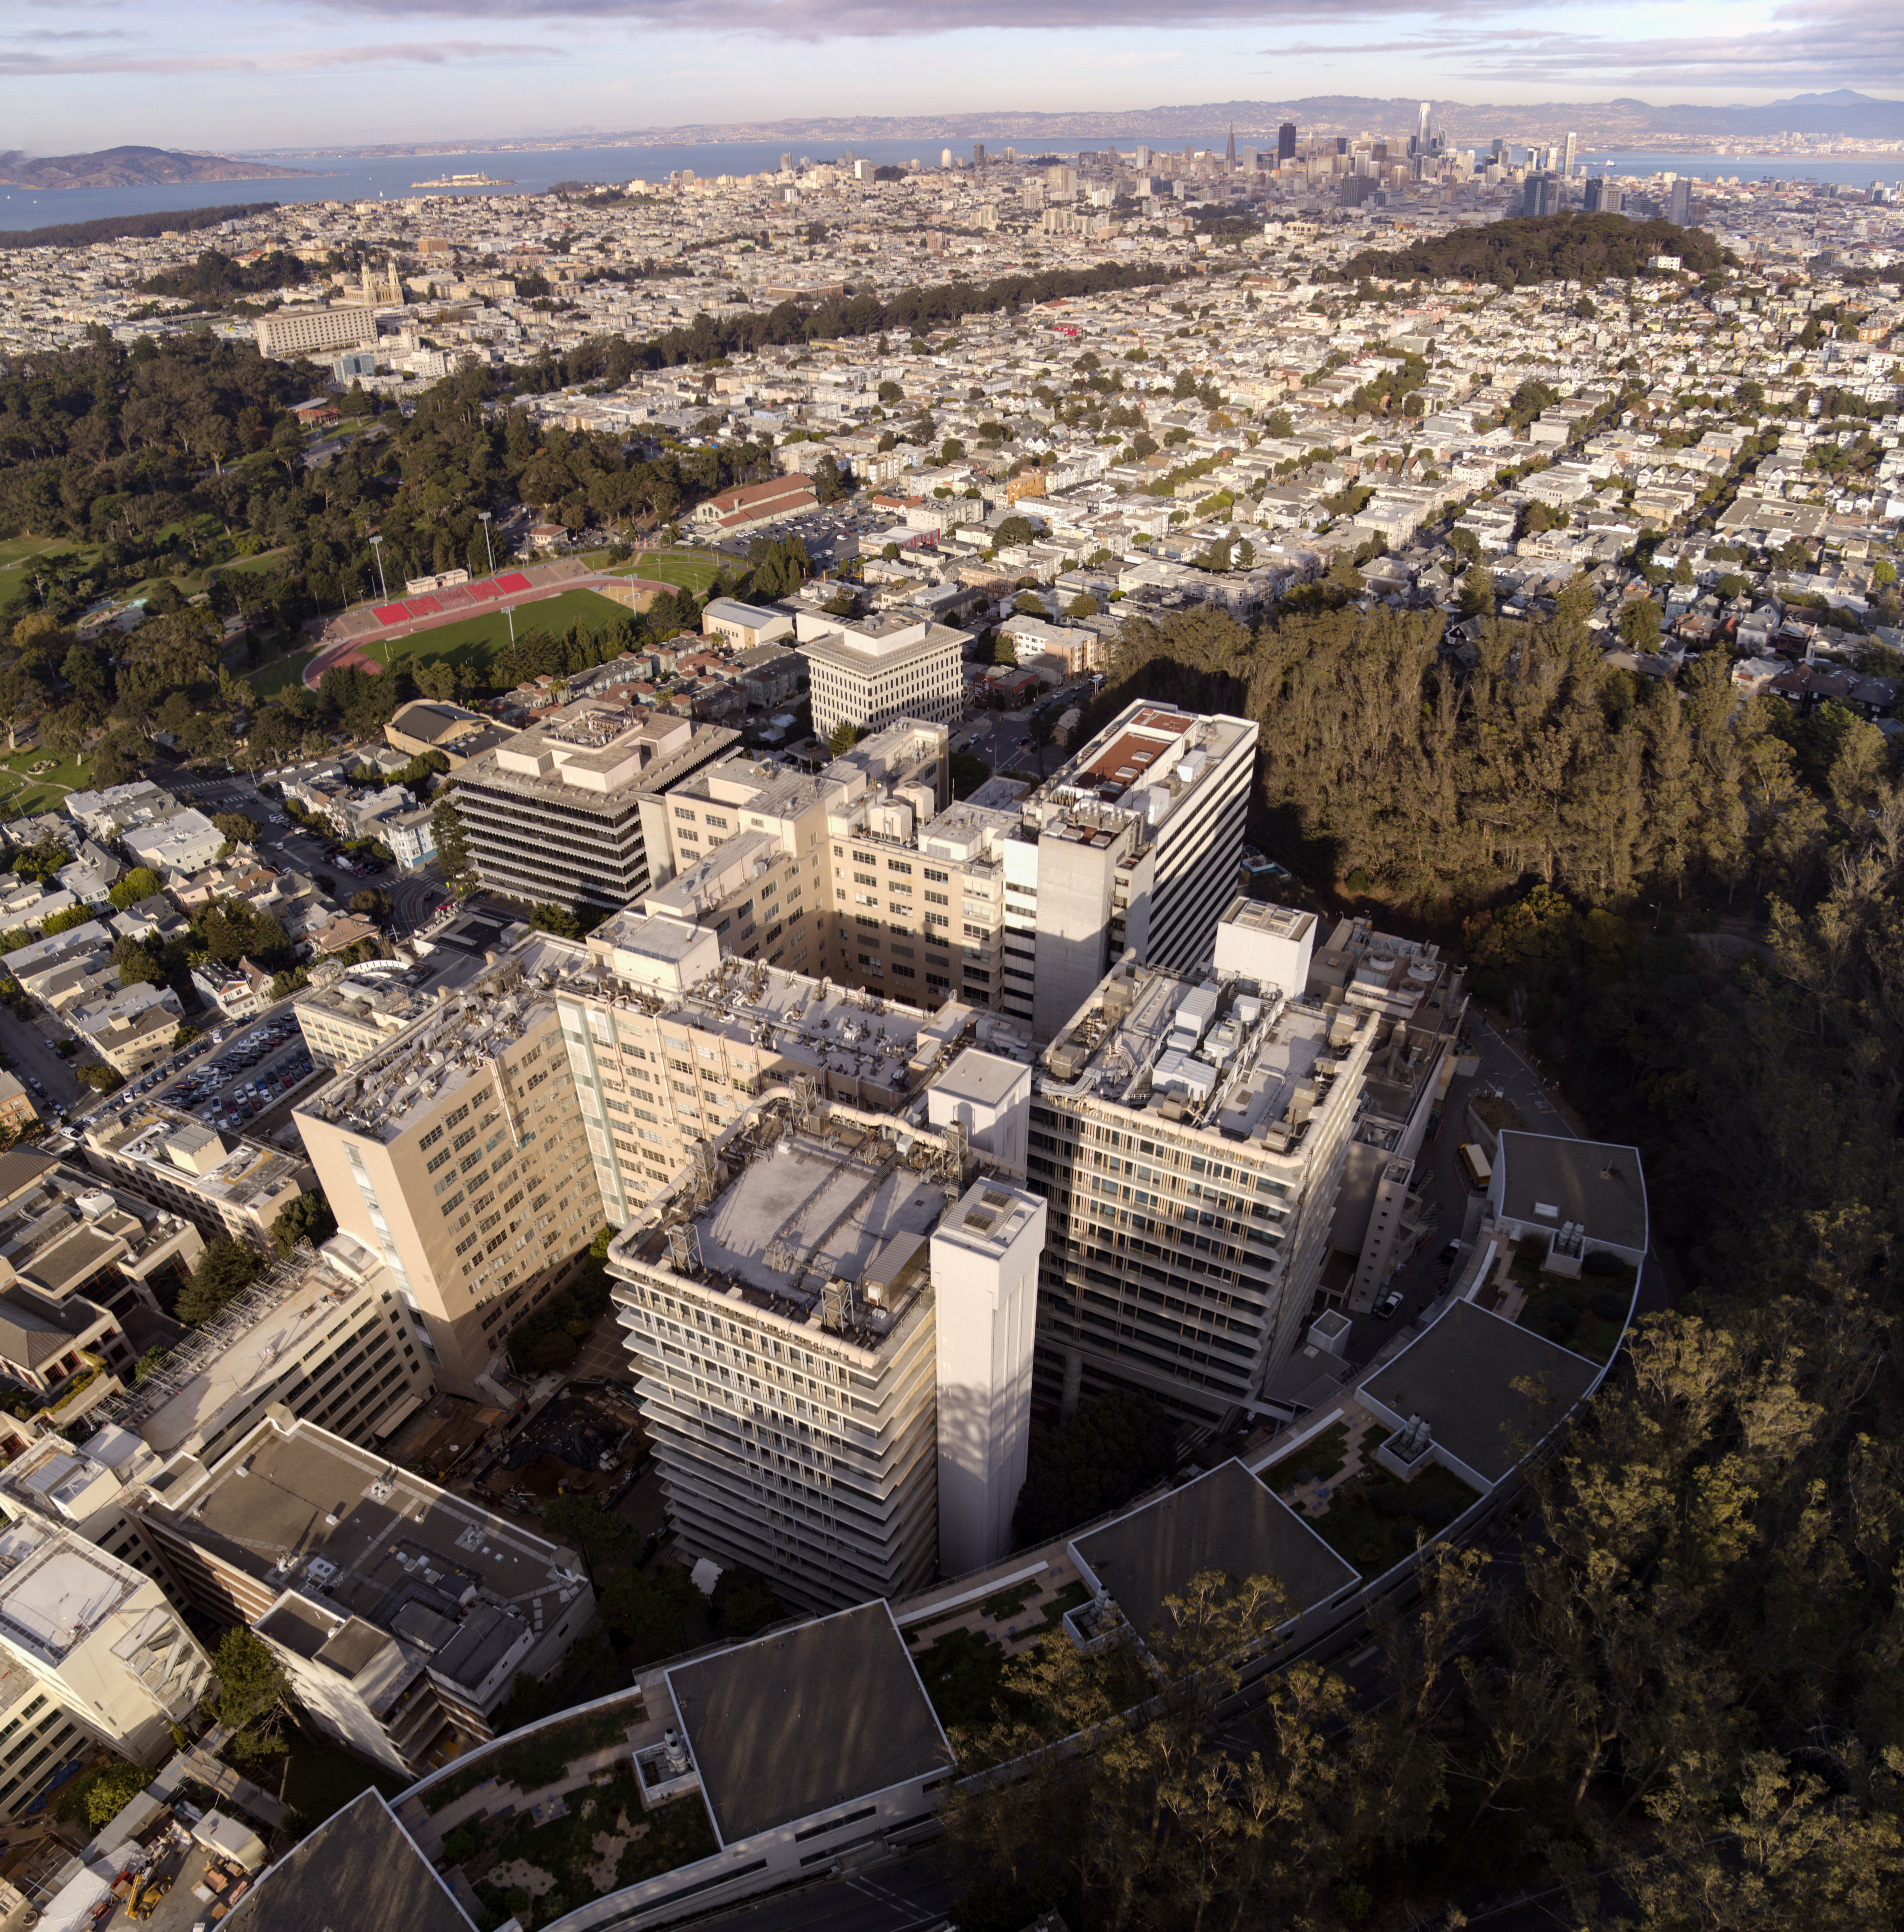 aerial view of the UCSF Parnassus Campus, showing the Parnassus Outpatient Surgery Center building